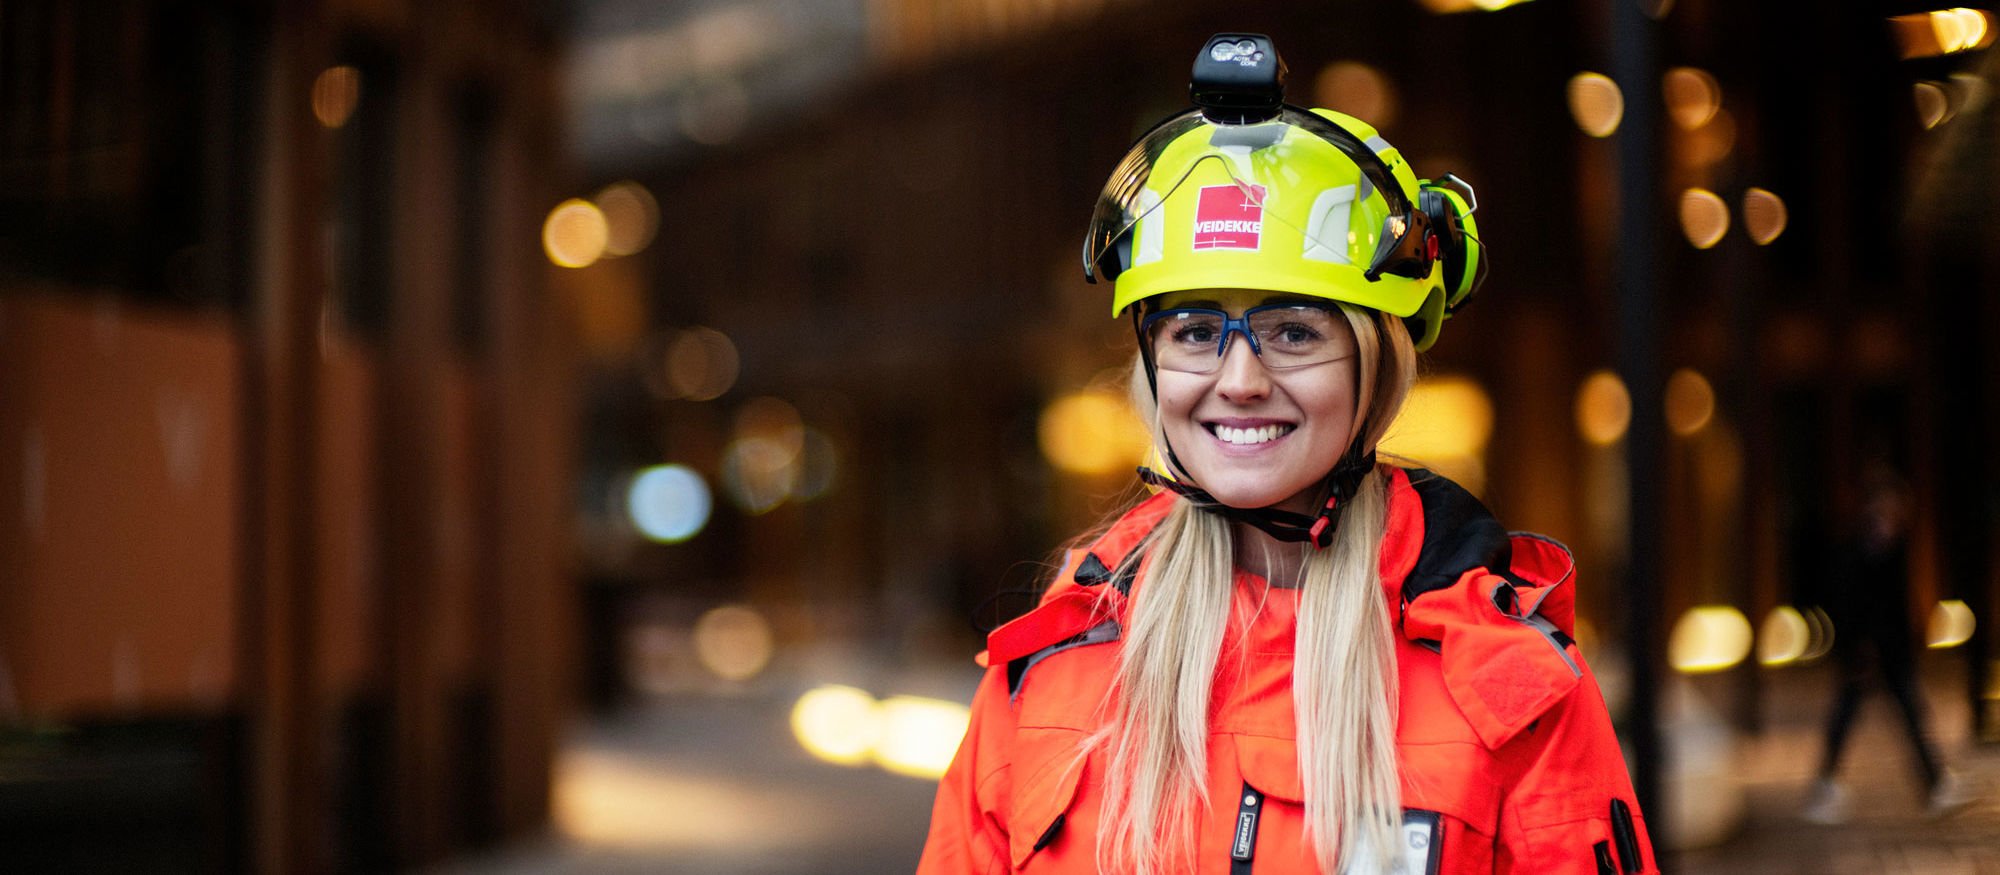 Woman with helmet and high-vis clothing smiling at camera. Photo.